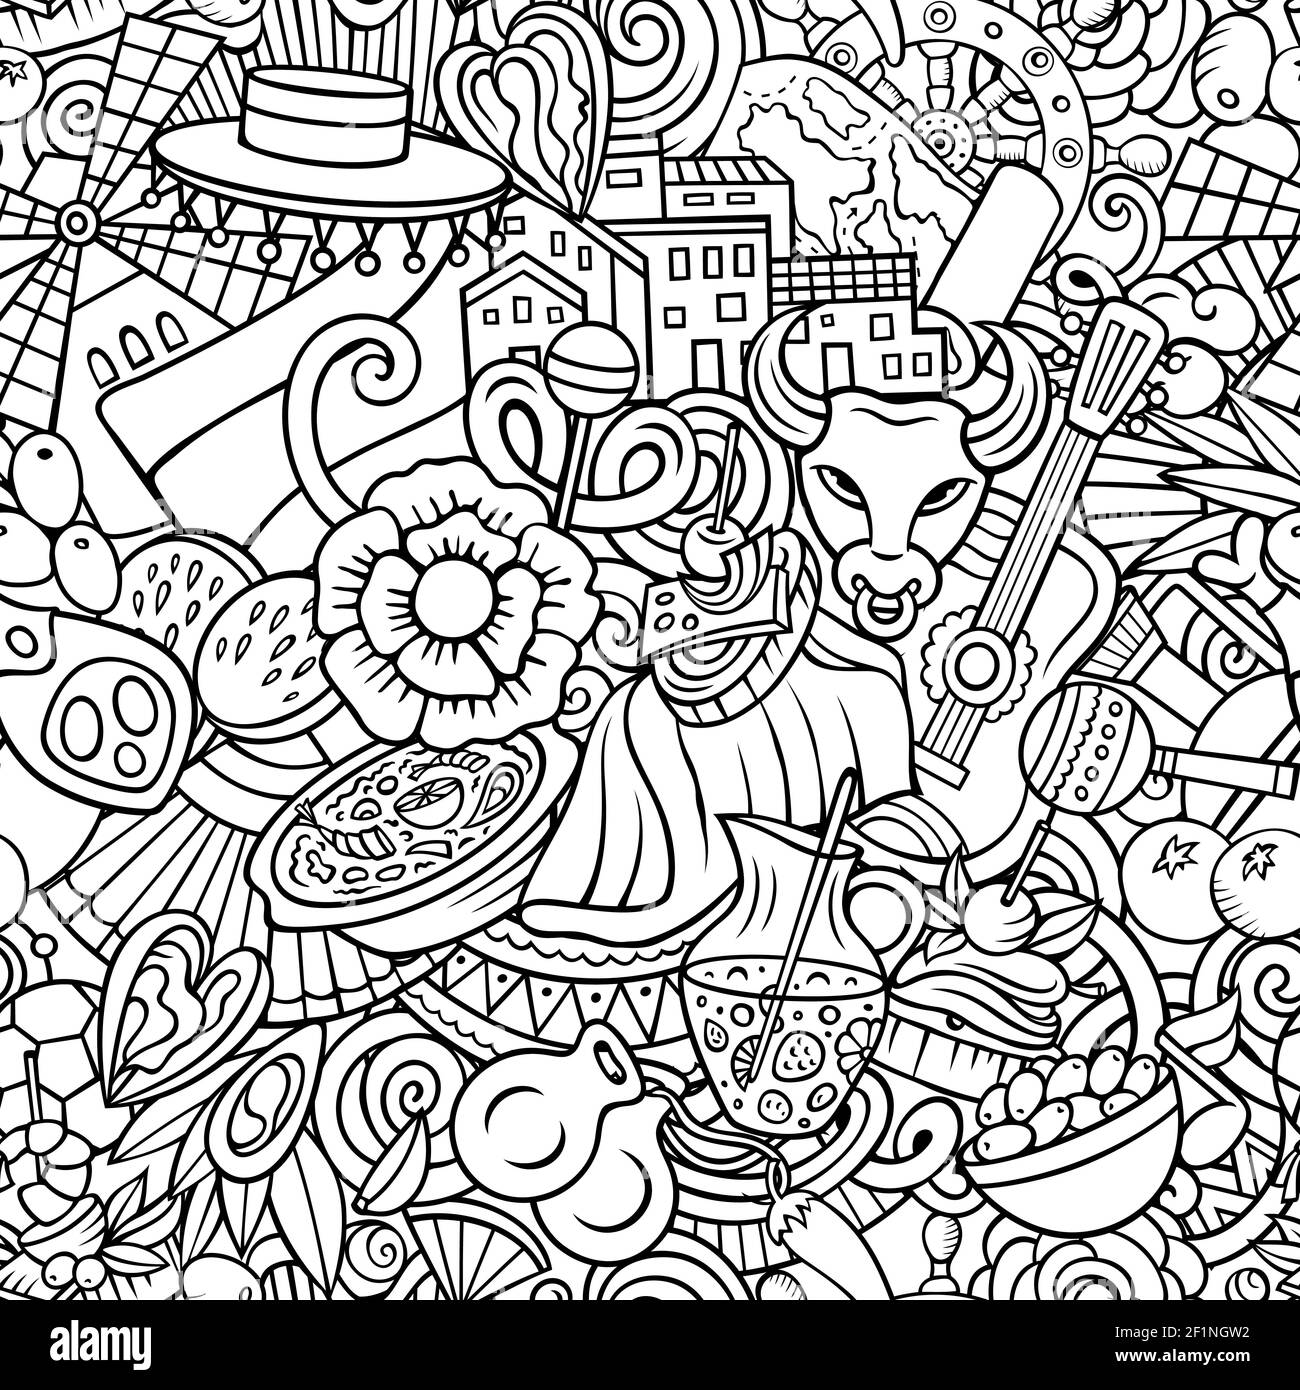 Cartoon doodles Spain seamless pattern. Backdrop with Spanish culture symbols and items. Line art detailed background for print on fabric, textile, wr Stock Vector